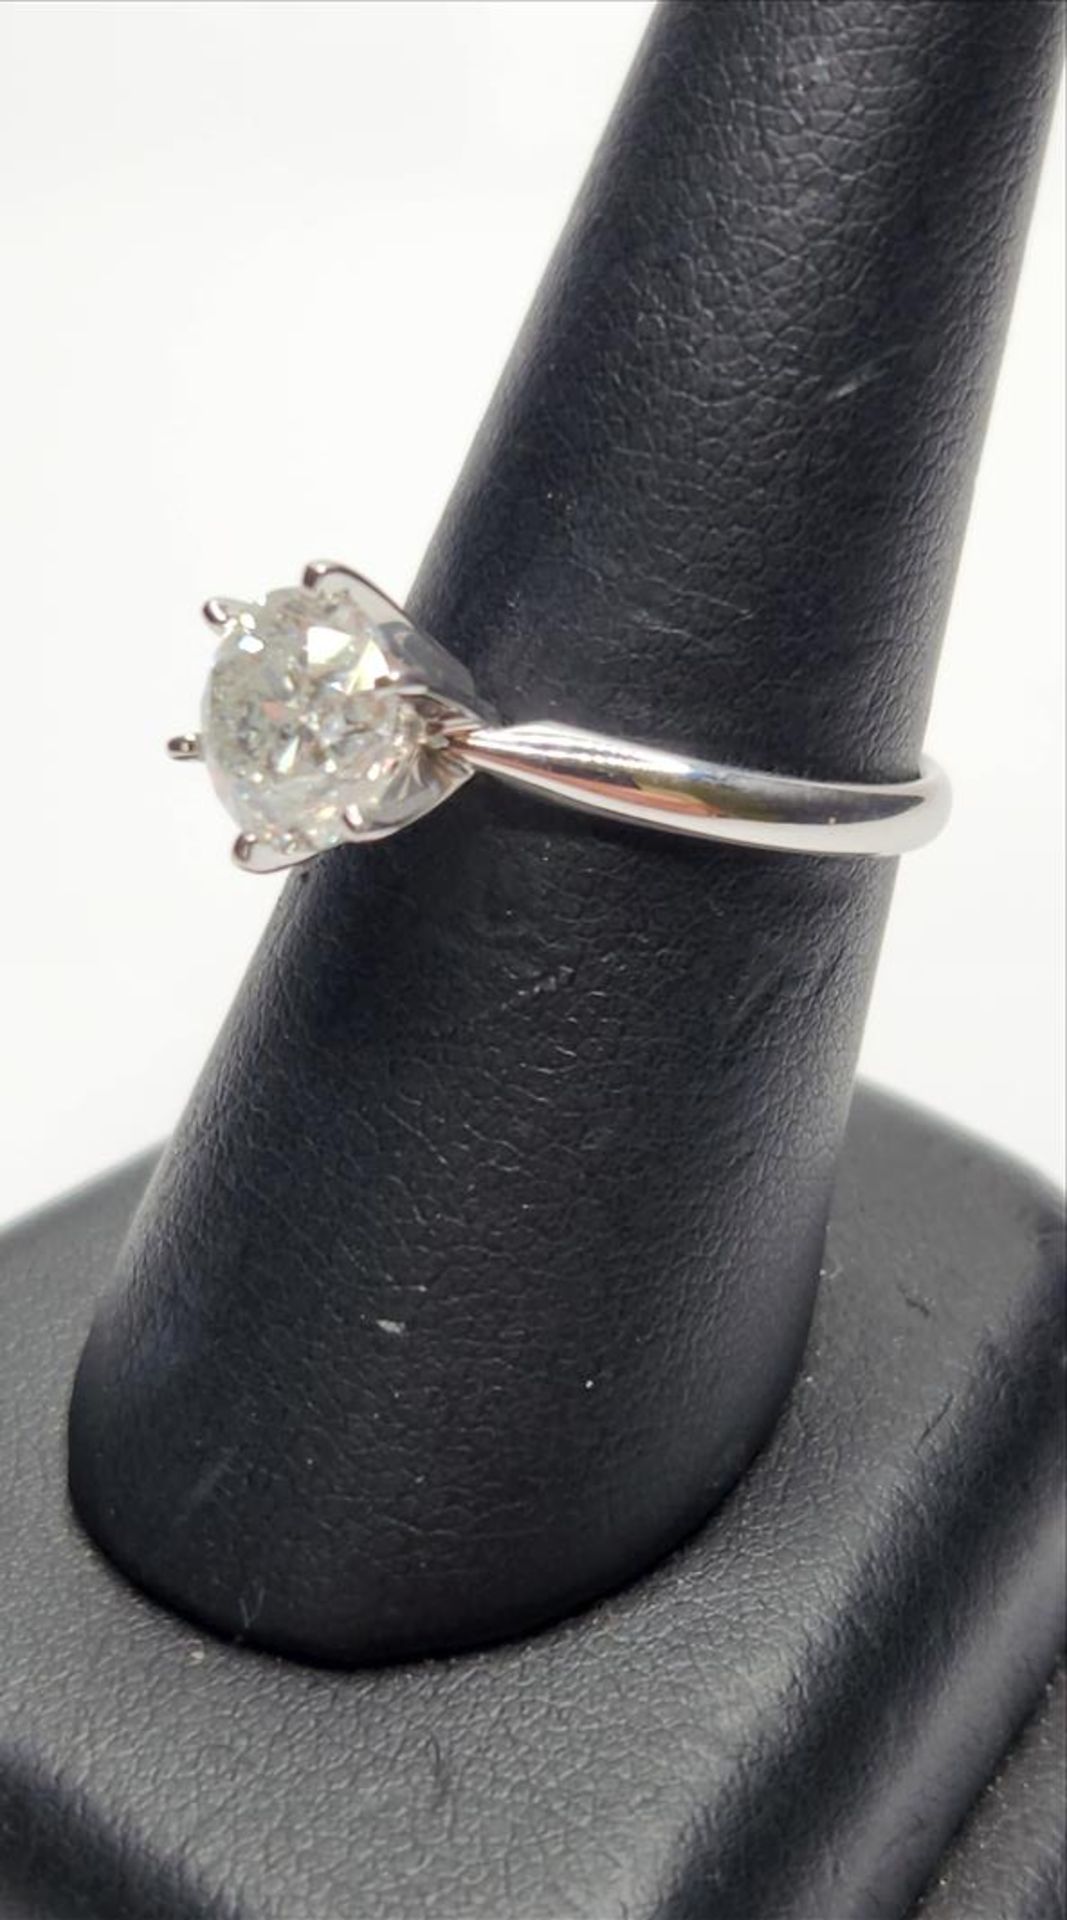 One lady’s stamped and tested 14kt white gold diamond solitaire engagement ring trademarked by Charm - Image 4 of 7